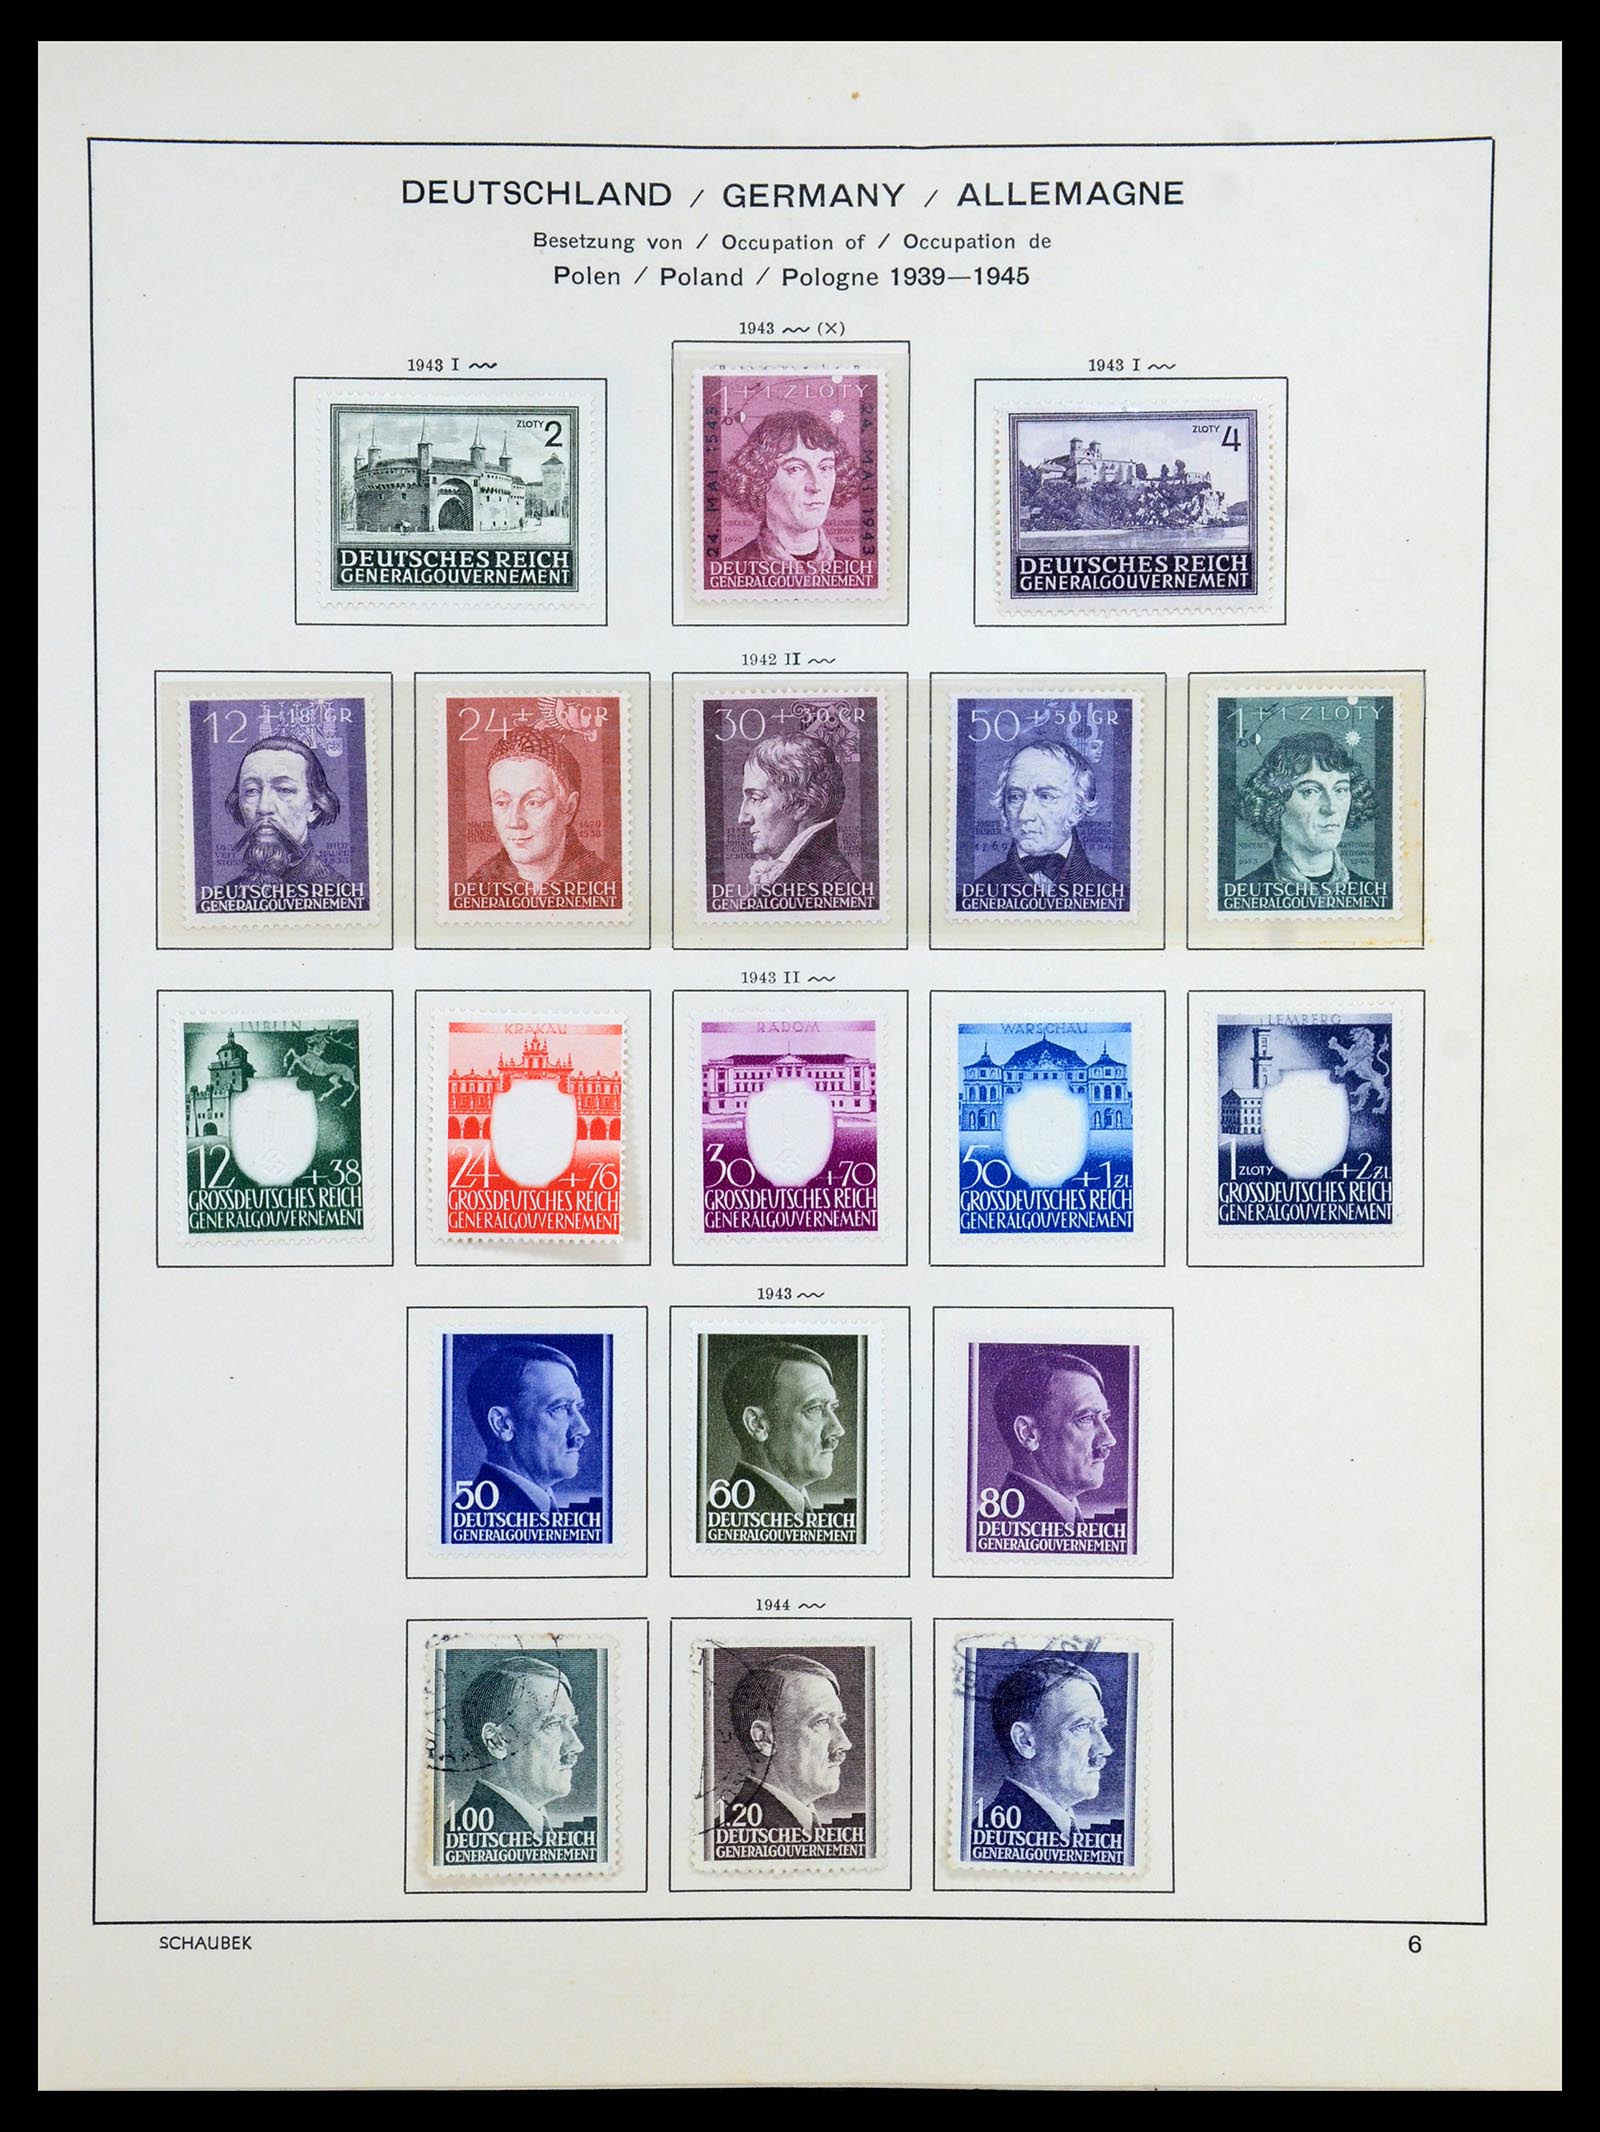 35964 014 - Stamp collection 35964 Germany occupations WW II 1939-1945.